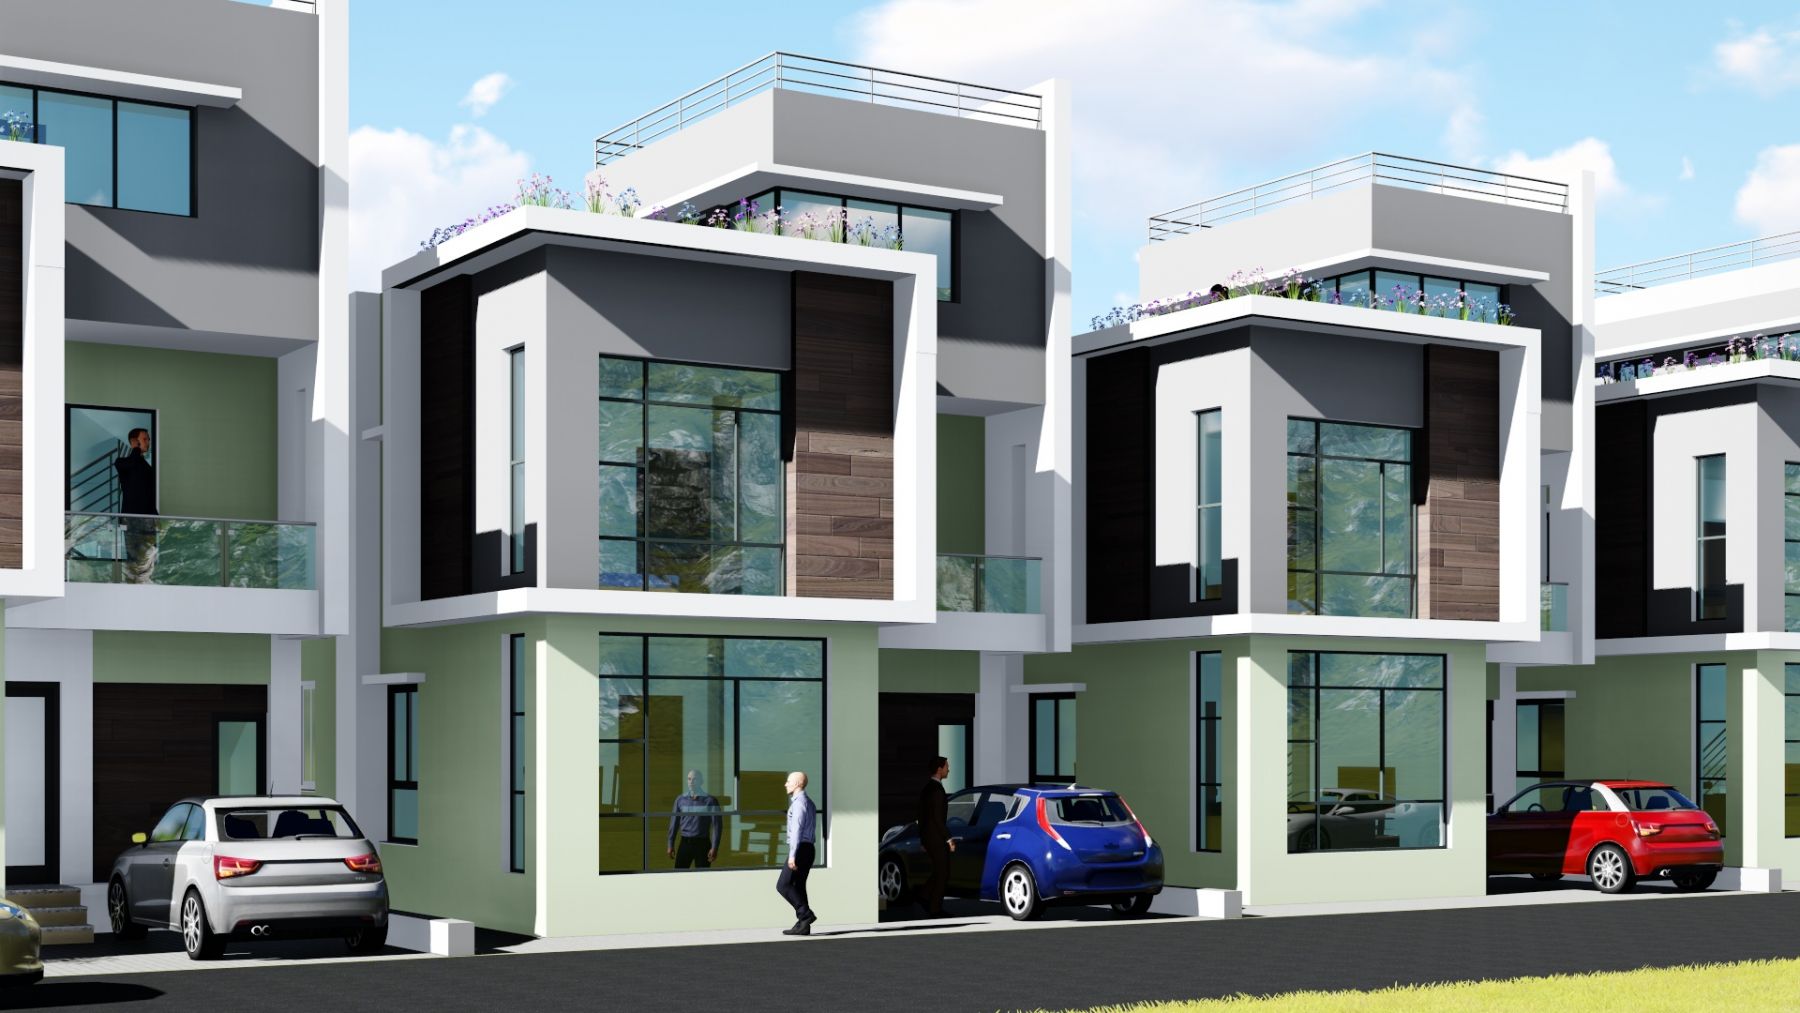 New House for sale in Hattiban Housing complex,  constructed by CE construction